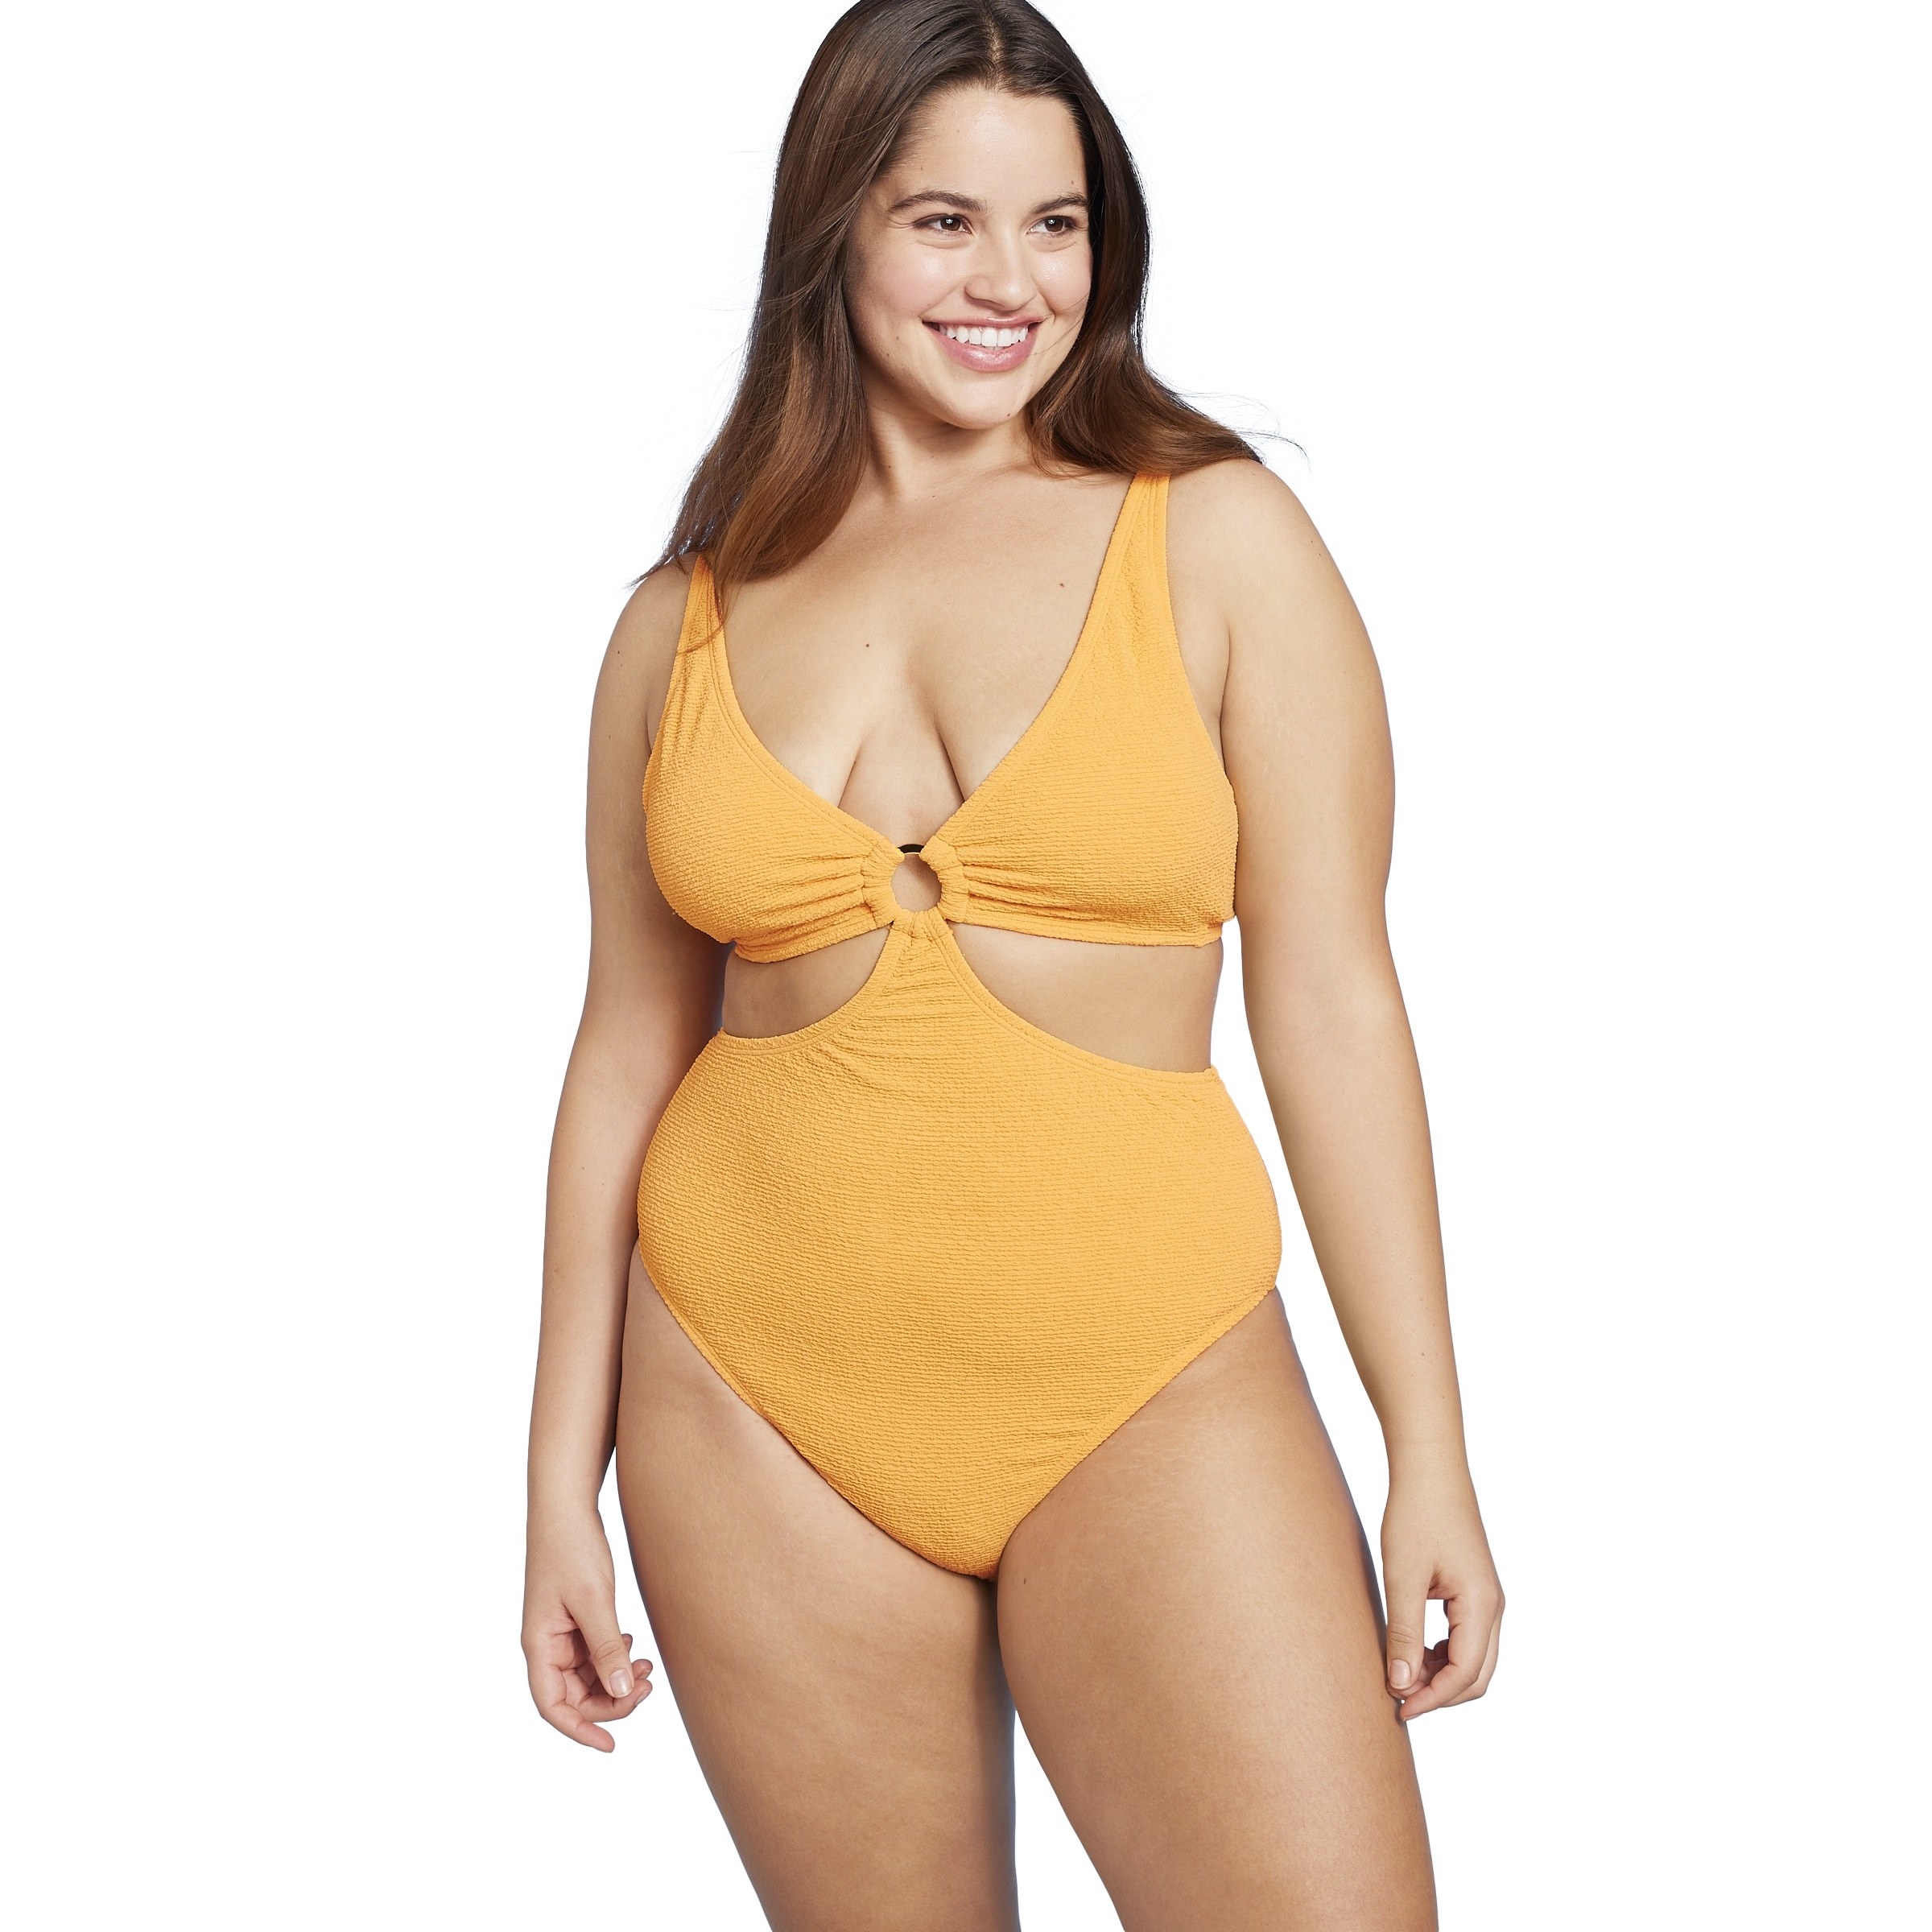 The cutout one-piece with a ring detail on the top